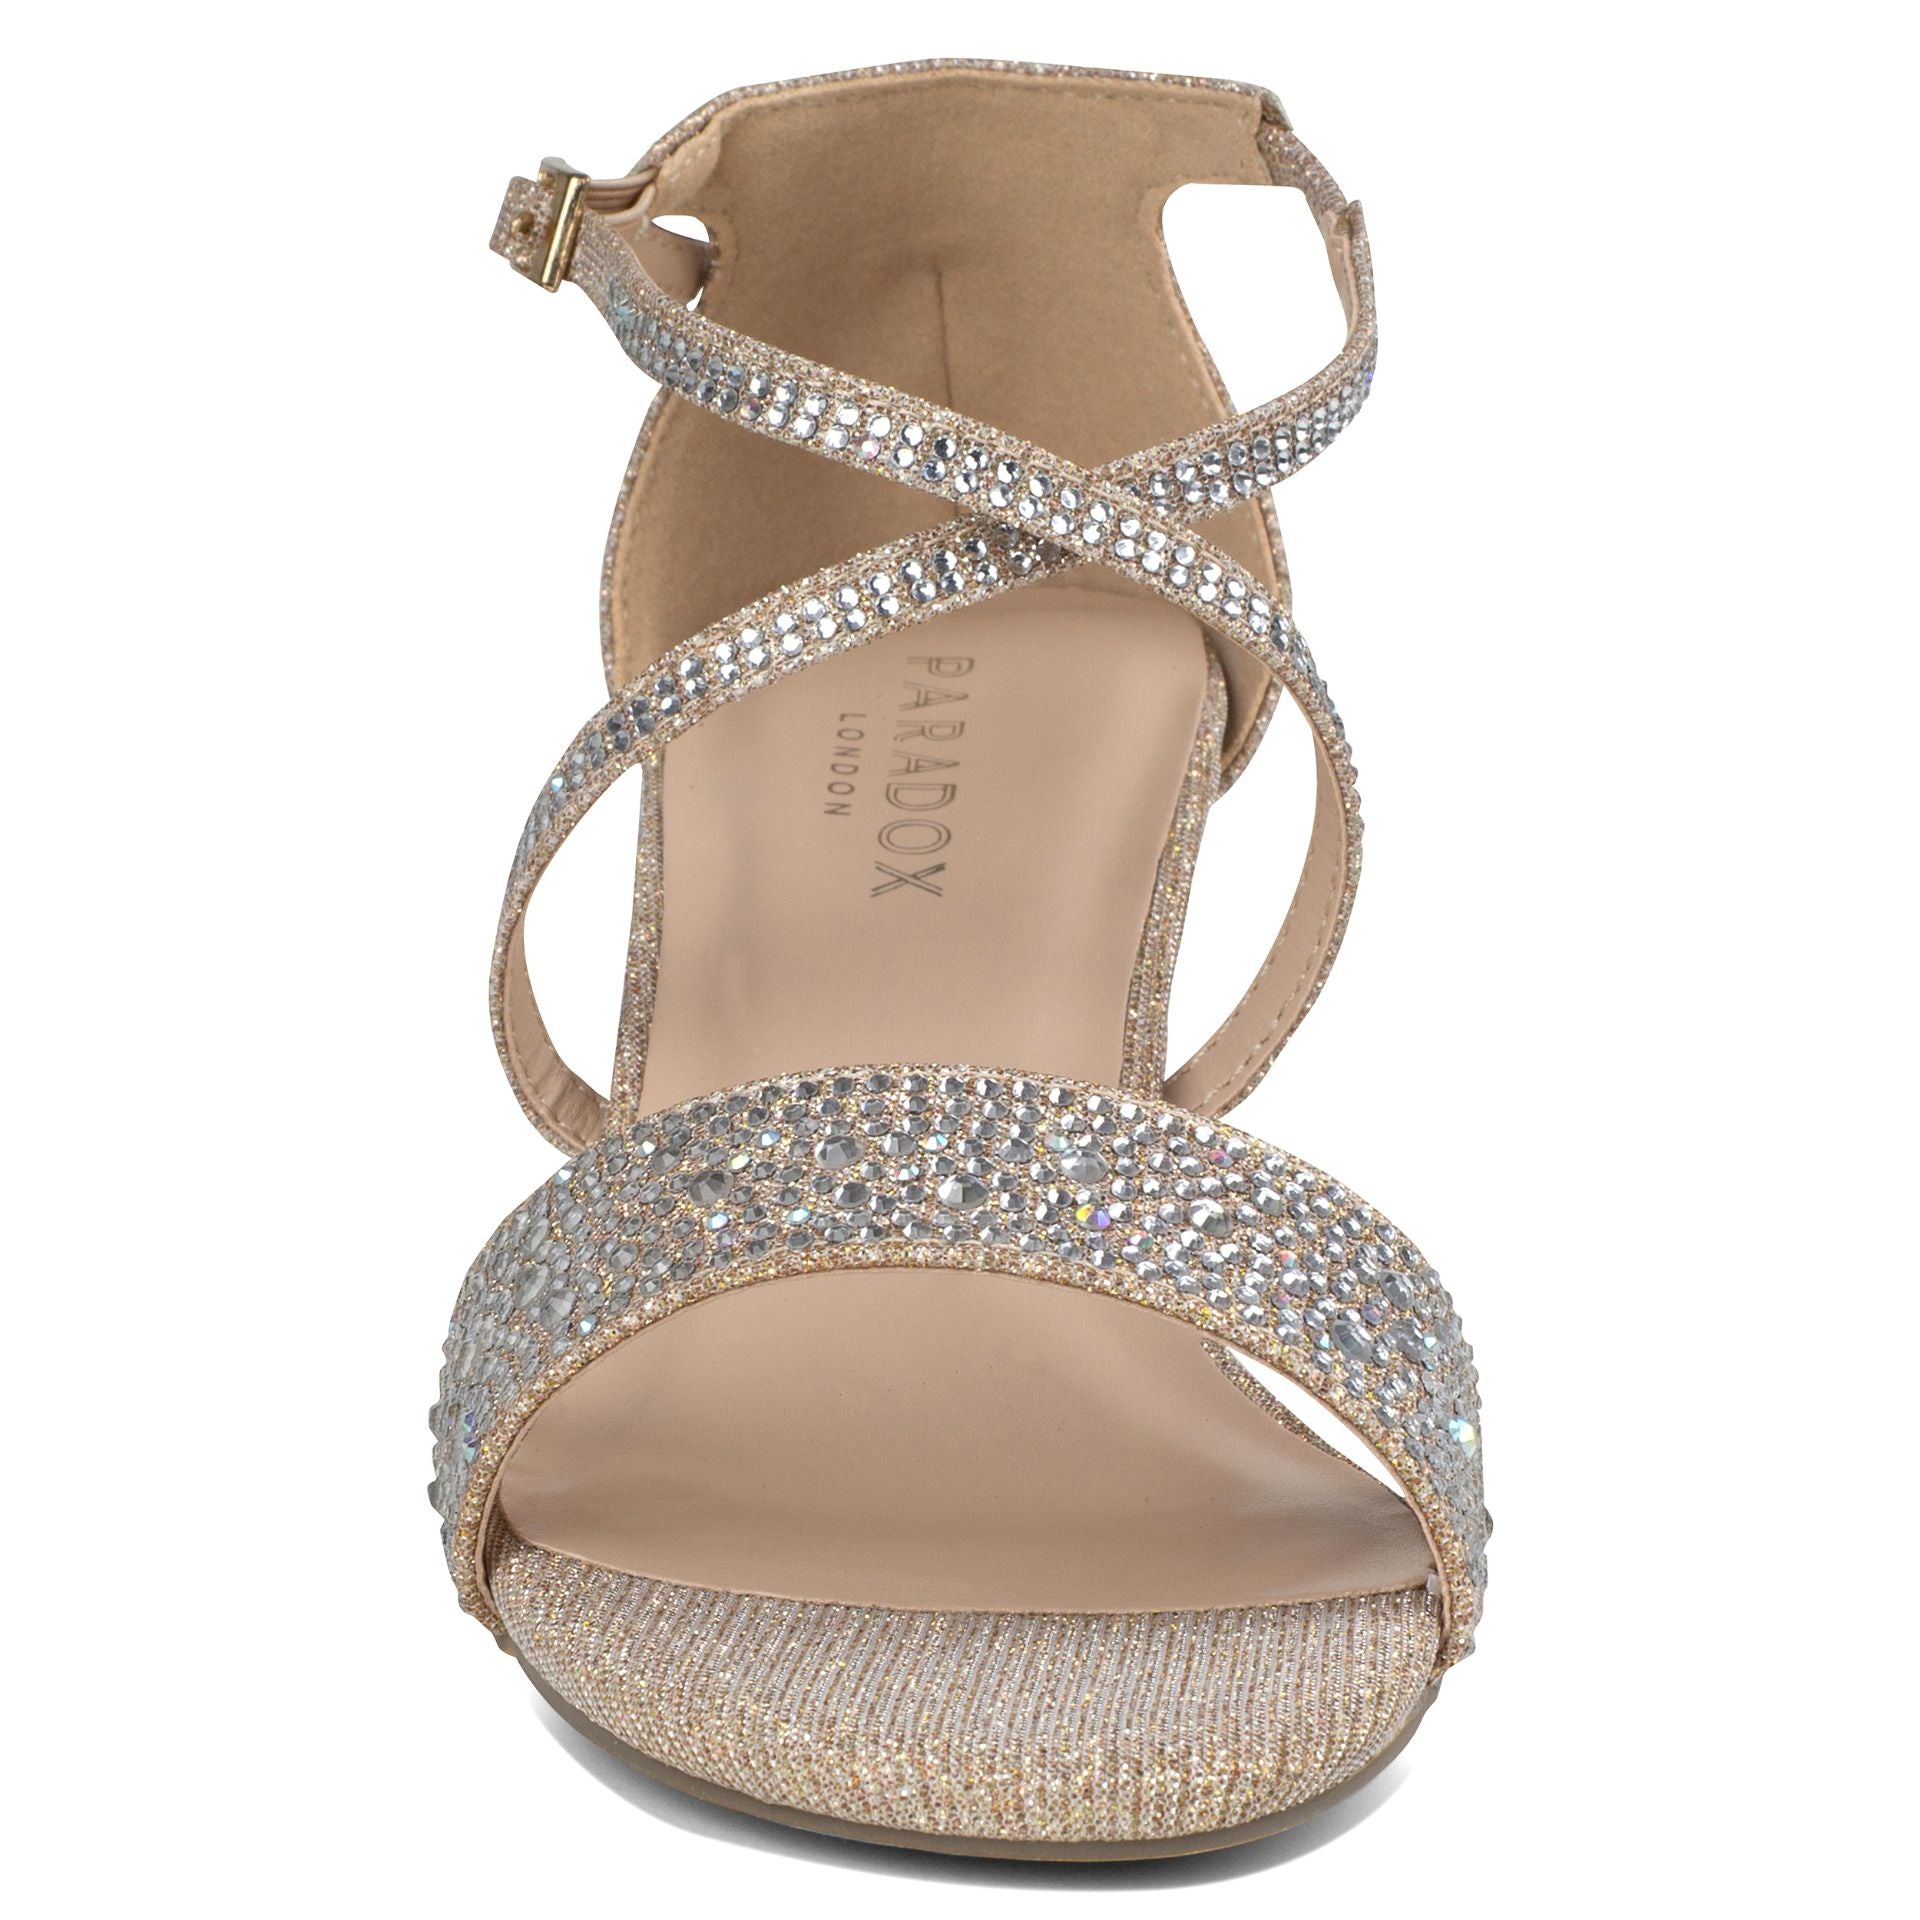 Front view of Metallic champage and rhinestone shoe with 2" block heel and criss cross straps